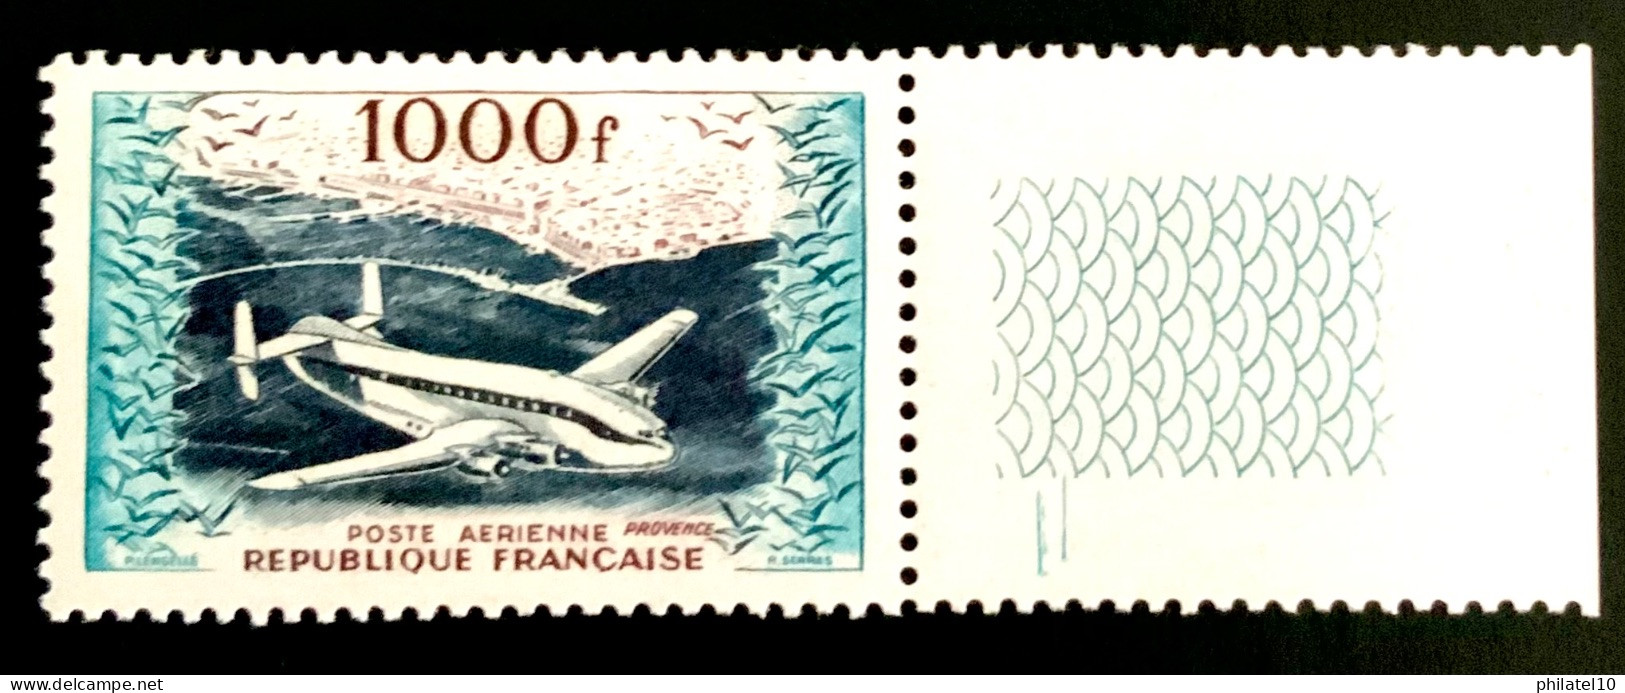 1954 FRANCE N 33 - POSTE AERIENNE LE PROVENCE 1000f - NEUF** - 1927-1959 Mint/hinged